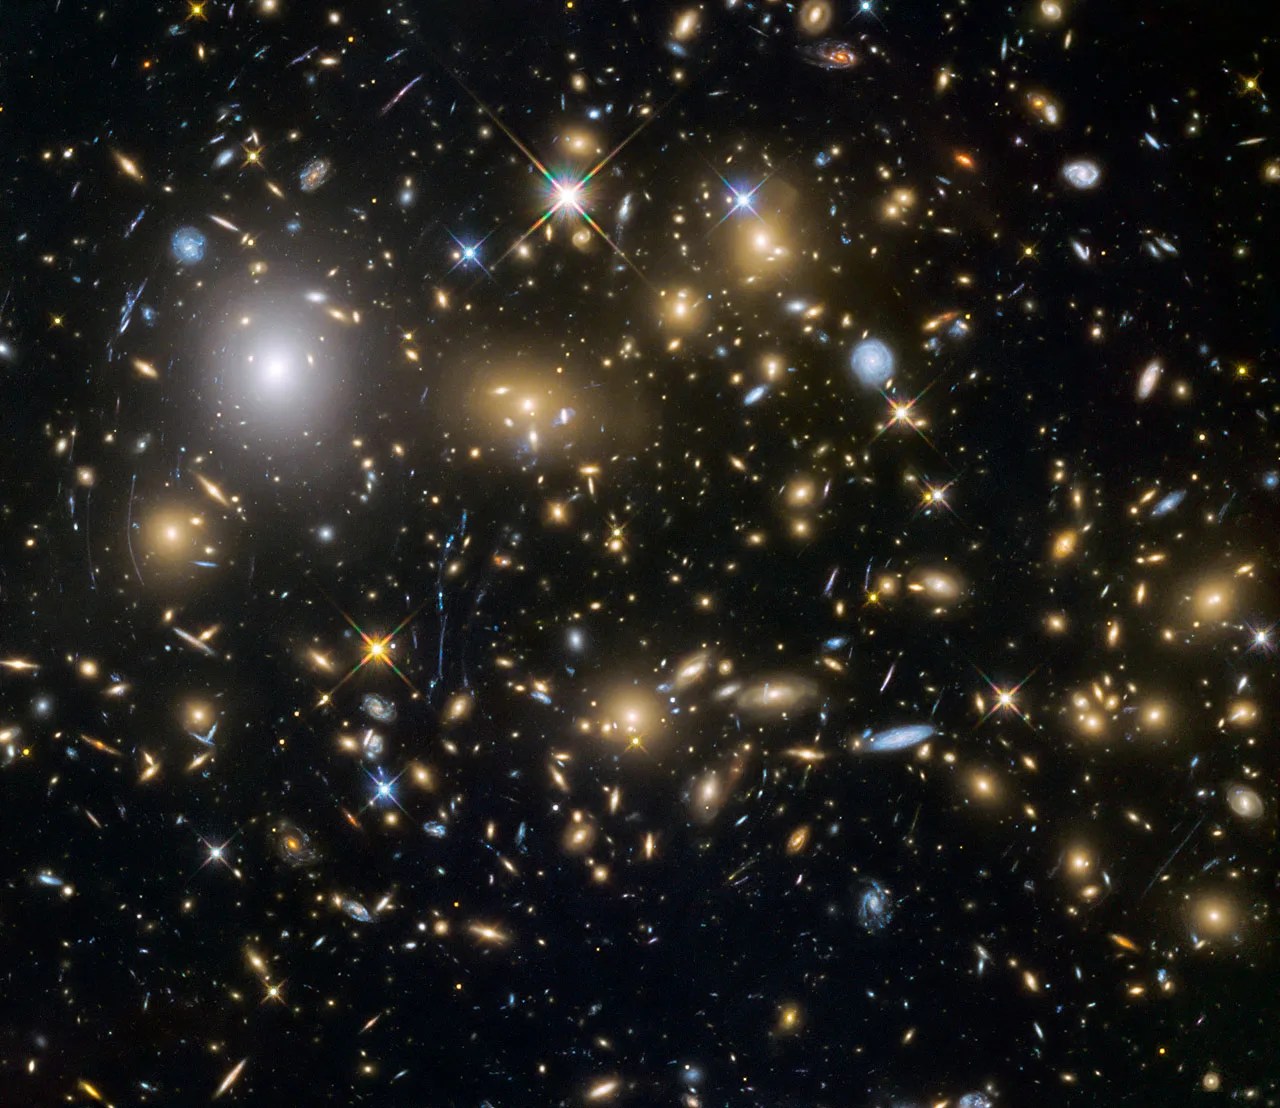 Large sample galaxies of different sizes and shapes, experiencing a "lens"-like distortion.